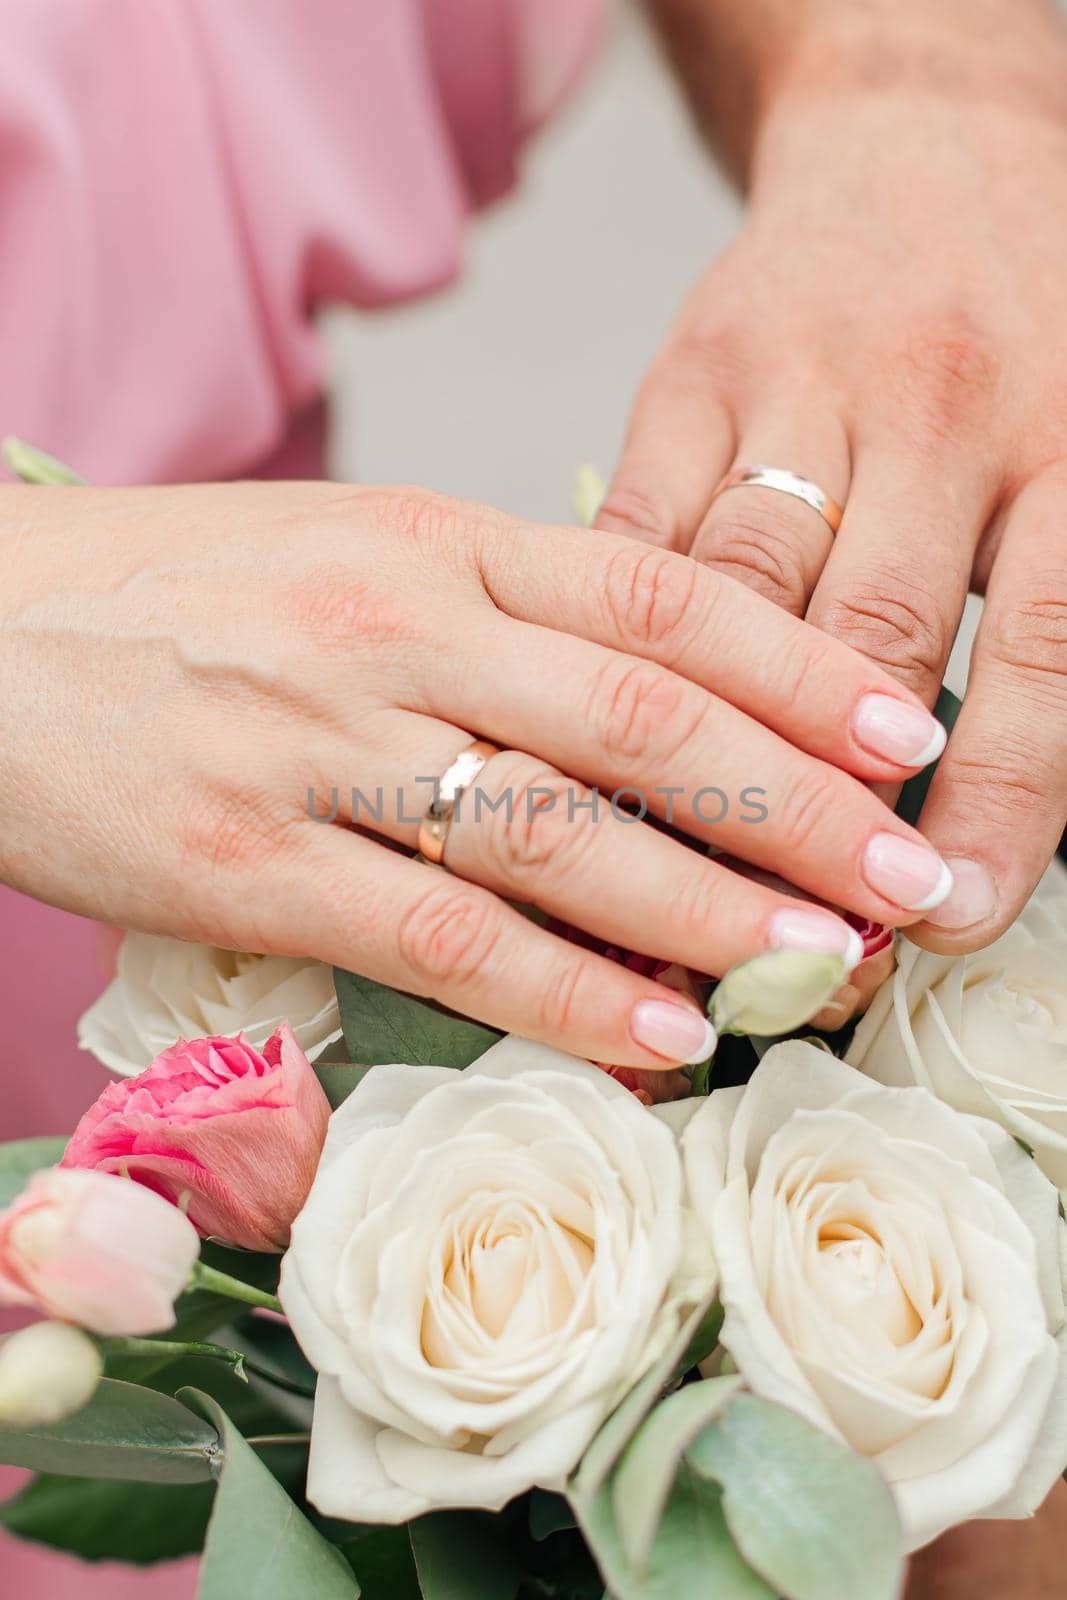 the hands of the bride and groom with rings over a bouquet of flowers by roman112007